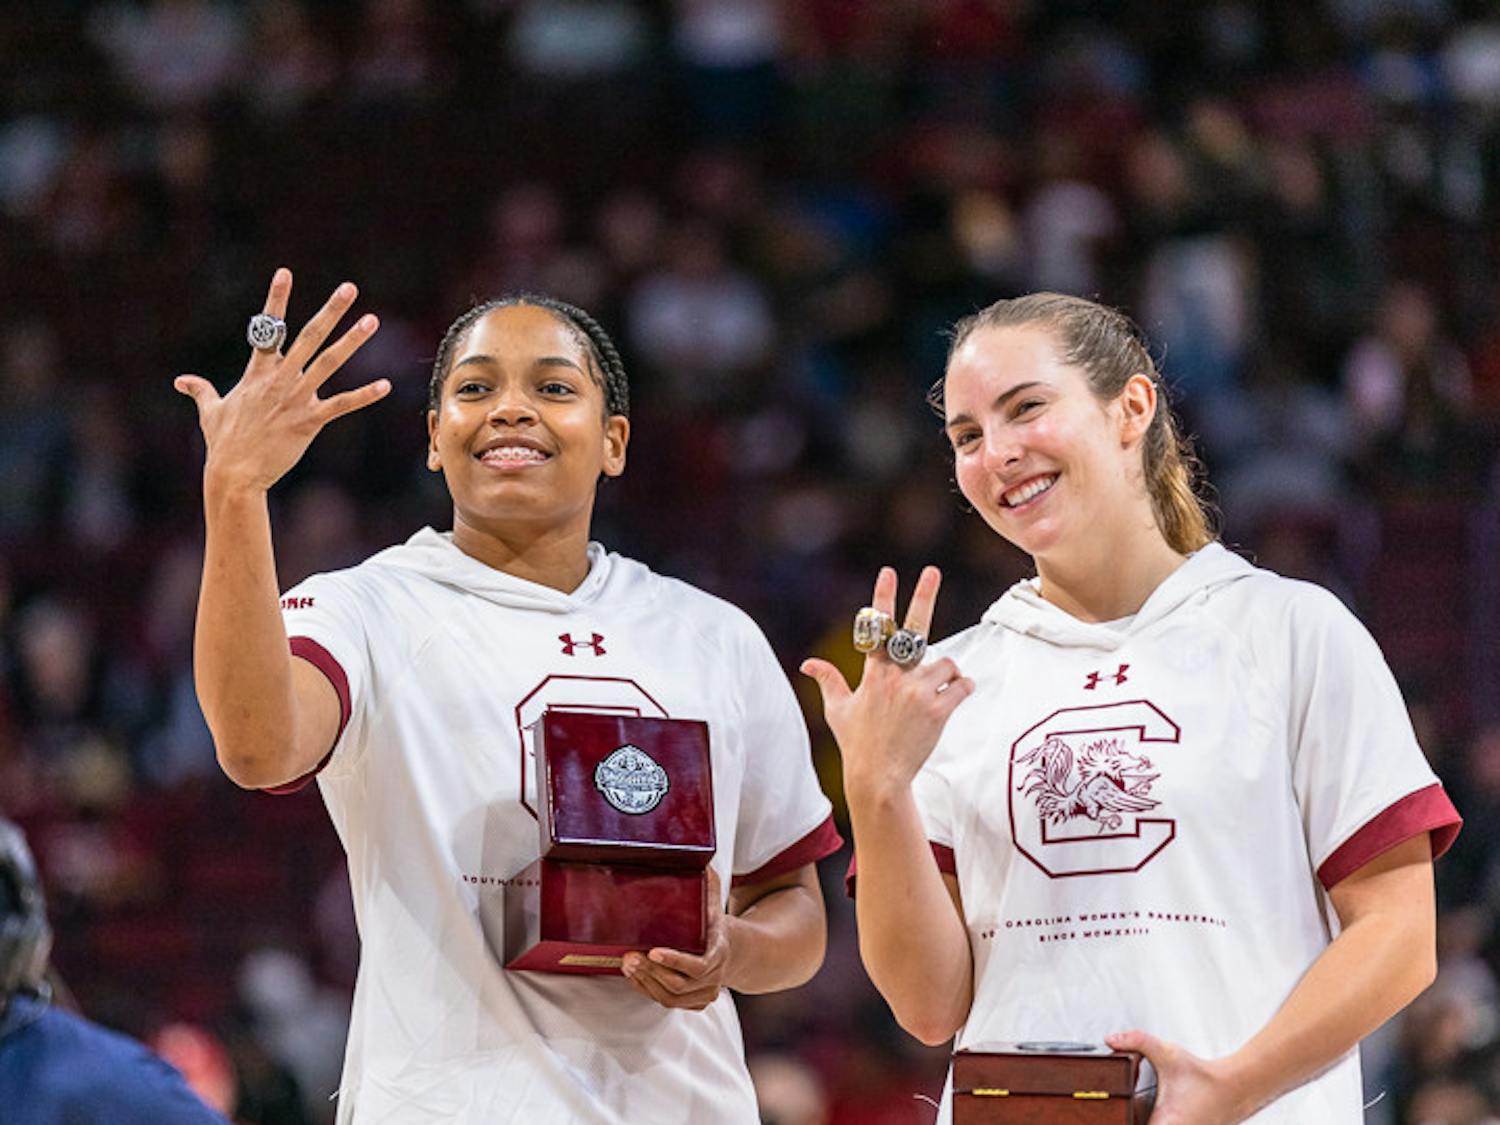 Senior guards Zia Cooke (left) and Olivia Thompson (right) smile during the ring ceremony. South Carolina played East Tennessee State on Nov. 7, 2022 and won 101-31.